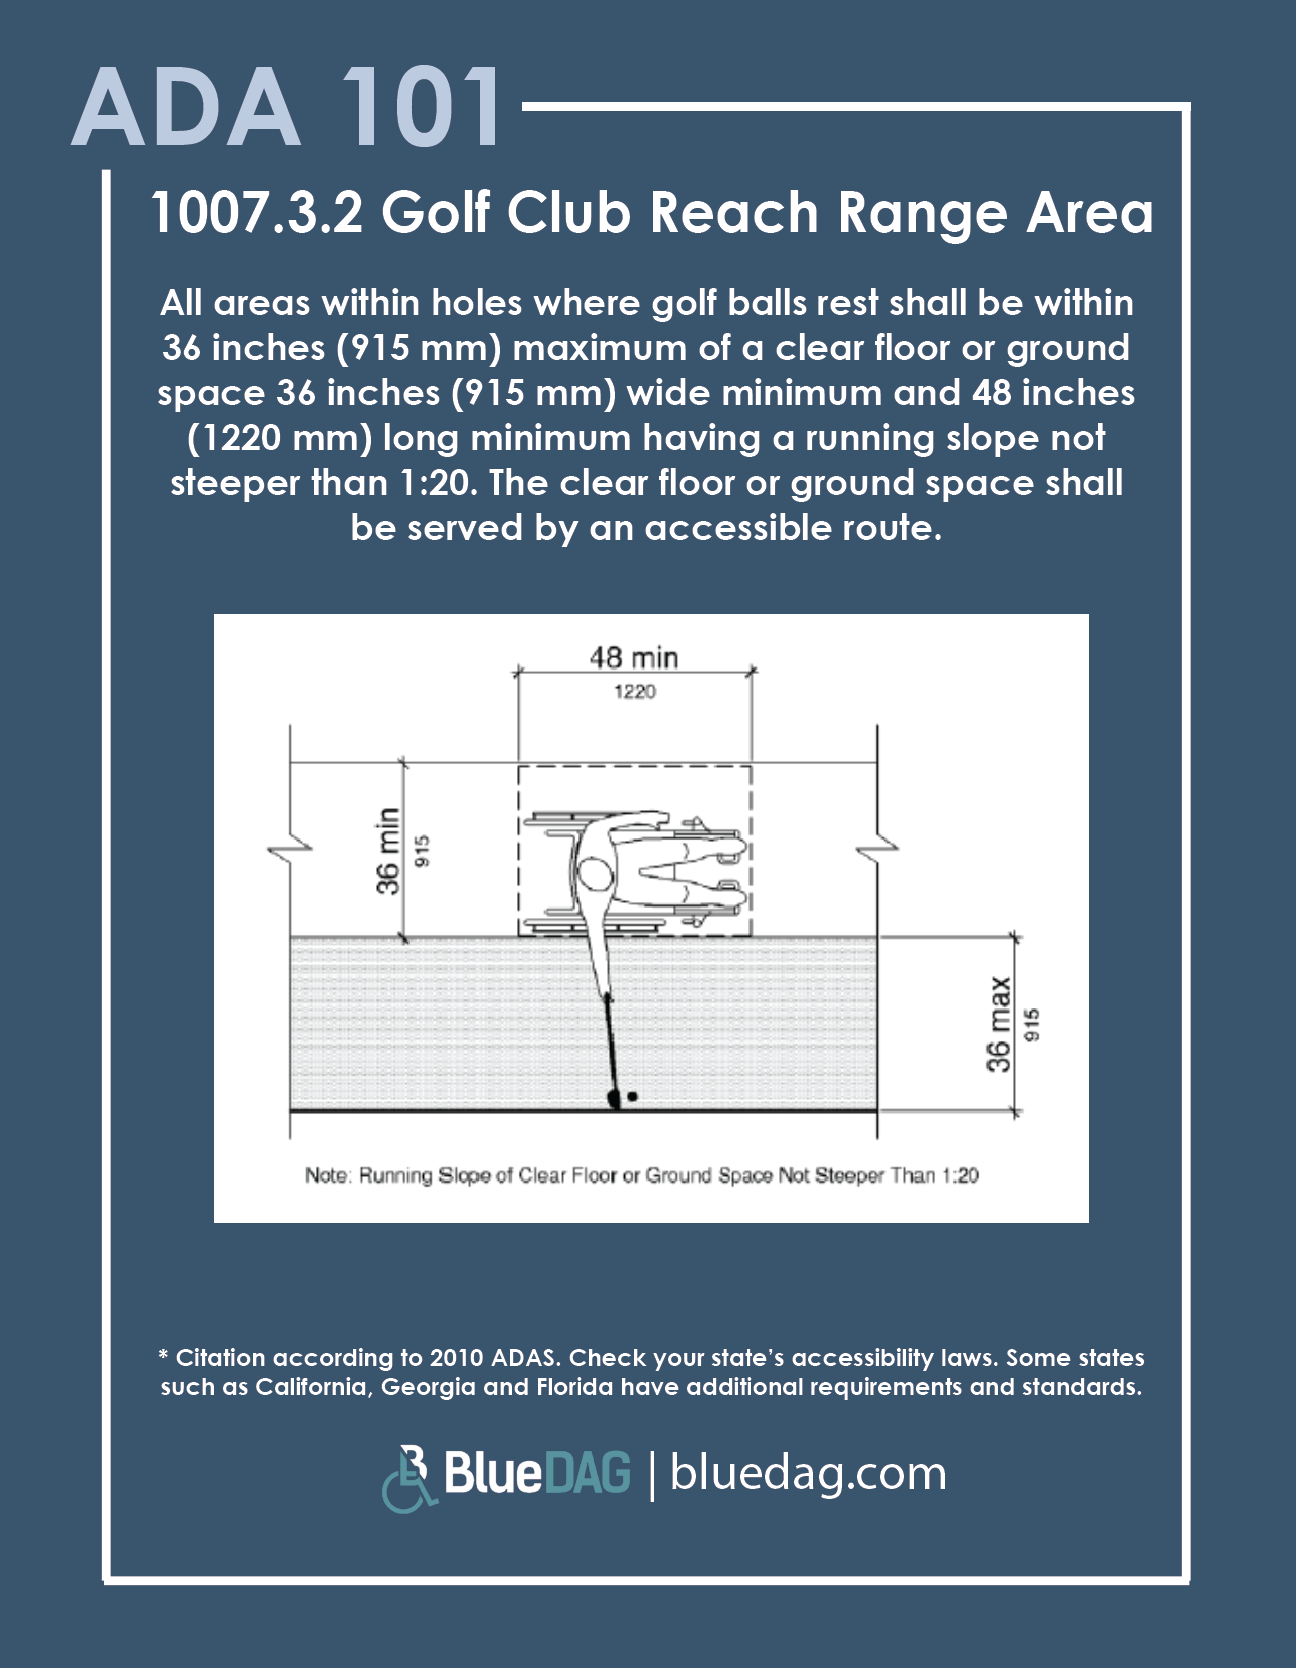 2010 ADAS 1007.3.2 Golf Club Reach Range Area All areas within holes where golf balls rest shall be within 36 inches (915 mm) maximum of a clear floor or ground space 36 inches (915 mm) wide minimum and 48 inches (1220 mm) long minimum having a running slope not steeper than 1:20. The clear floor or ground space shall be served by an accessible route. Citation according to 2010 ADAS. Check your state’s accessibility laws. Some states such as California, Georgia and Florida have additional requirements and standards.